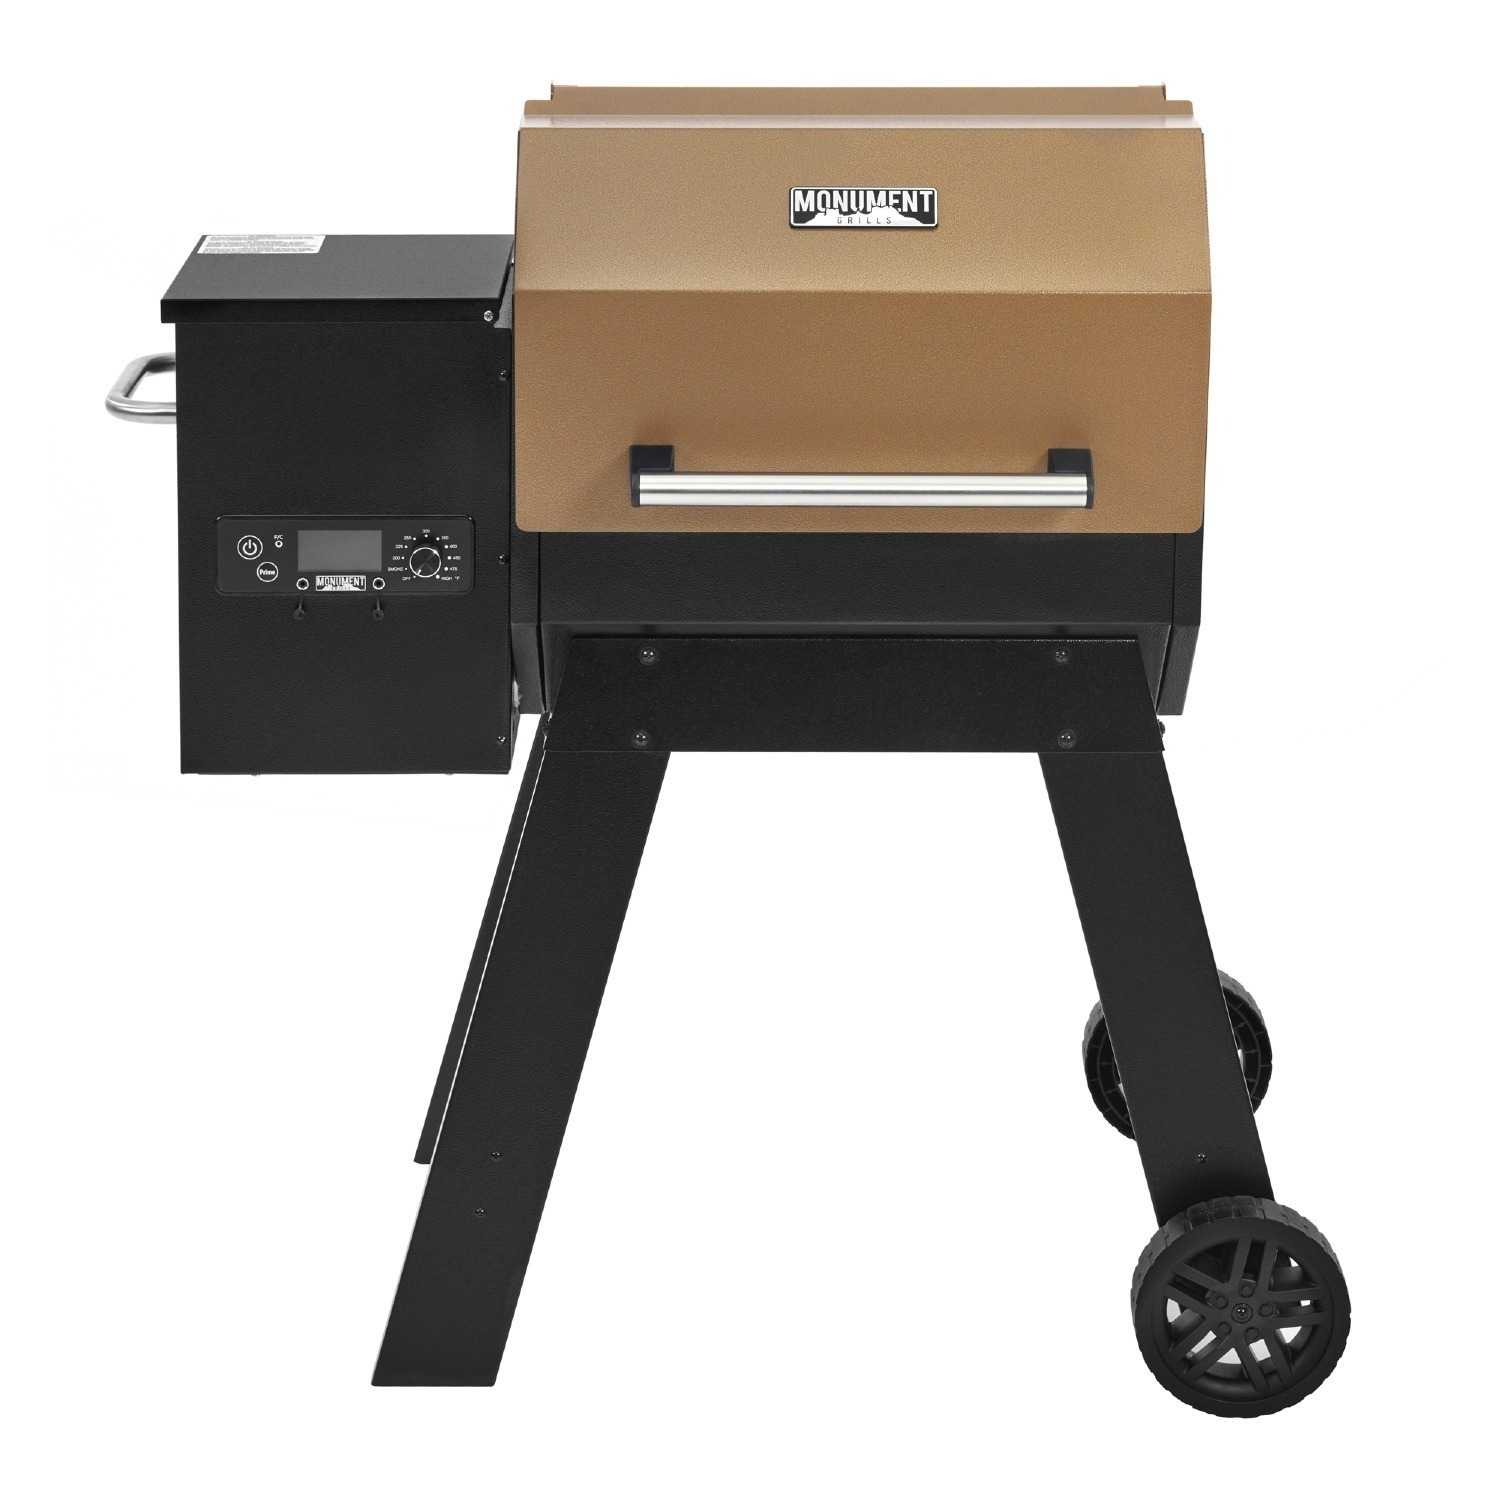 Monument Grills Octagonal Column Wood Pellet Grill Outdoor Smoker $243.99 + Free Delivery